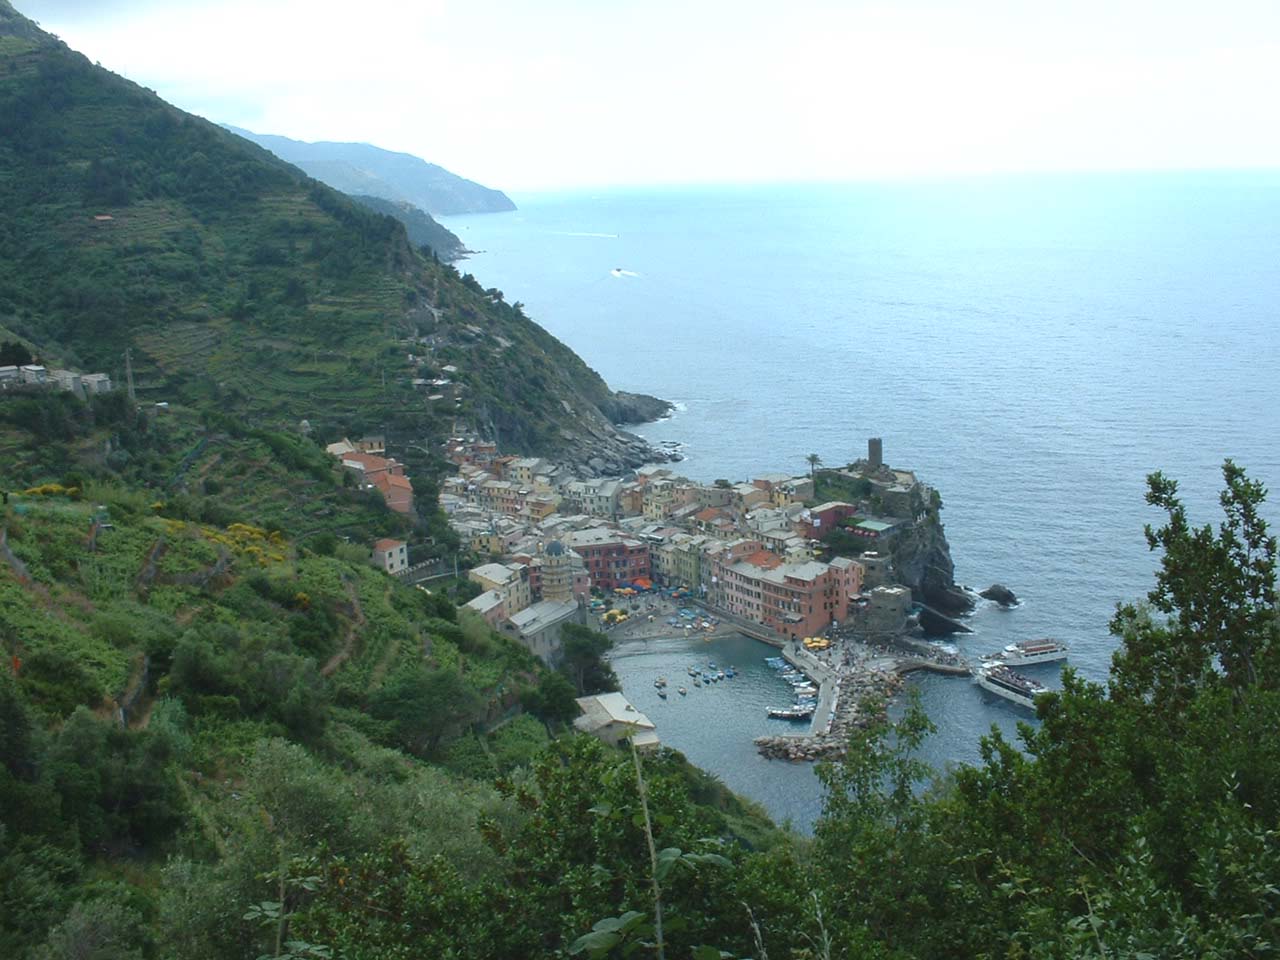 the ocean and a town surrounded by lush vegetation